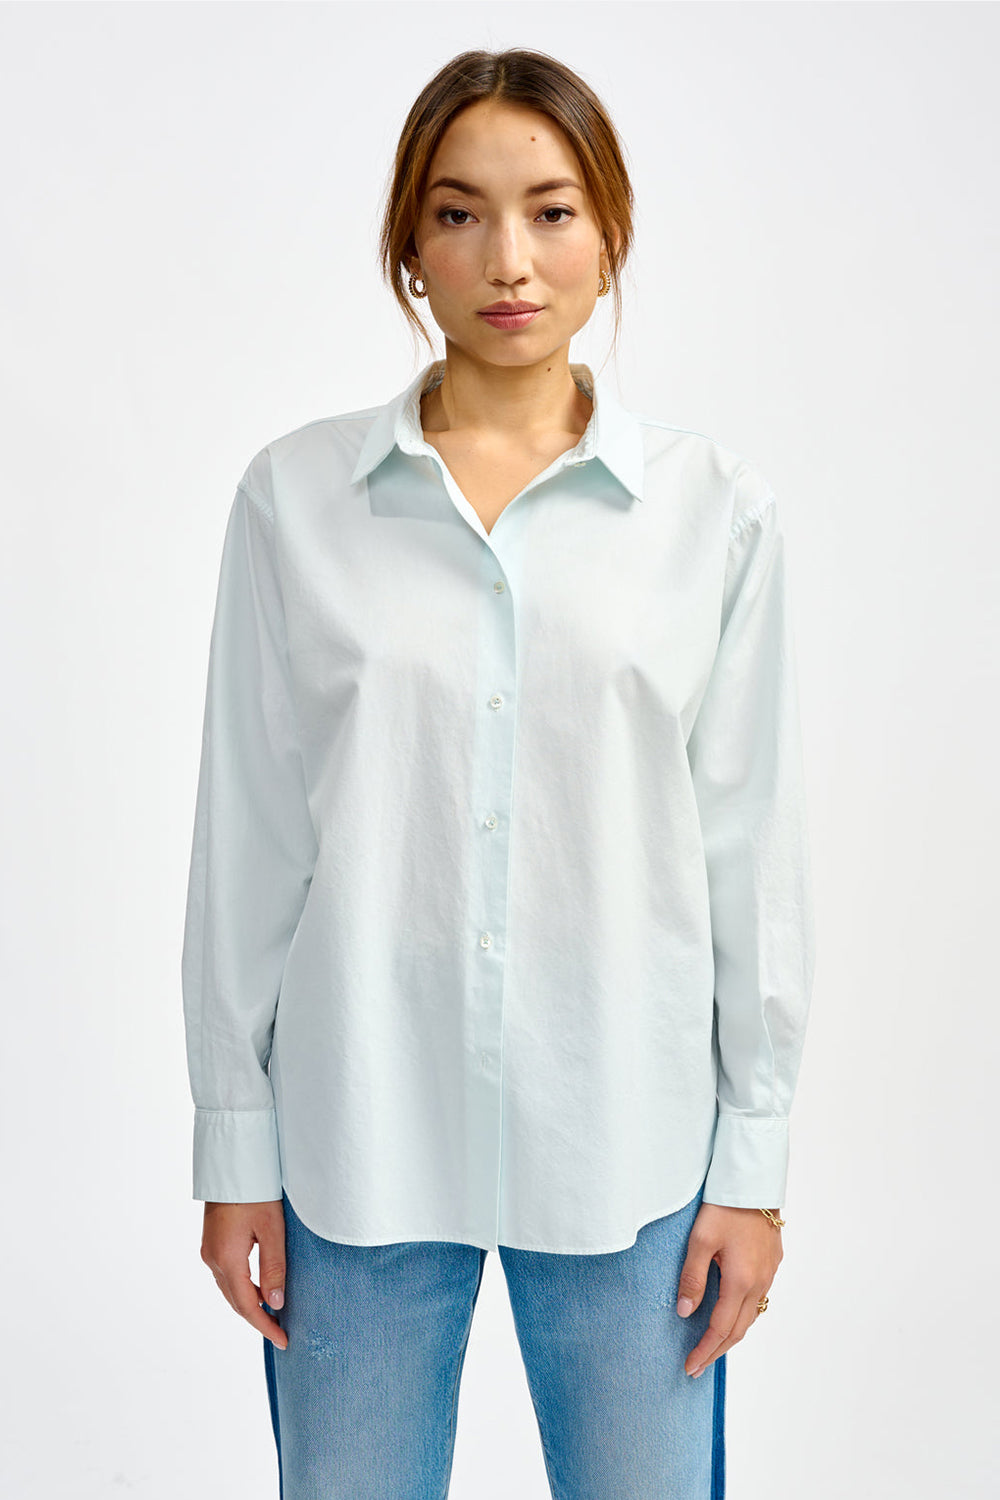 Blouses & Shirts | Womens Clothing | The Standard Store Australia